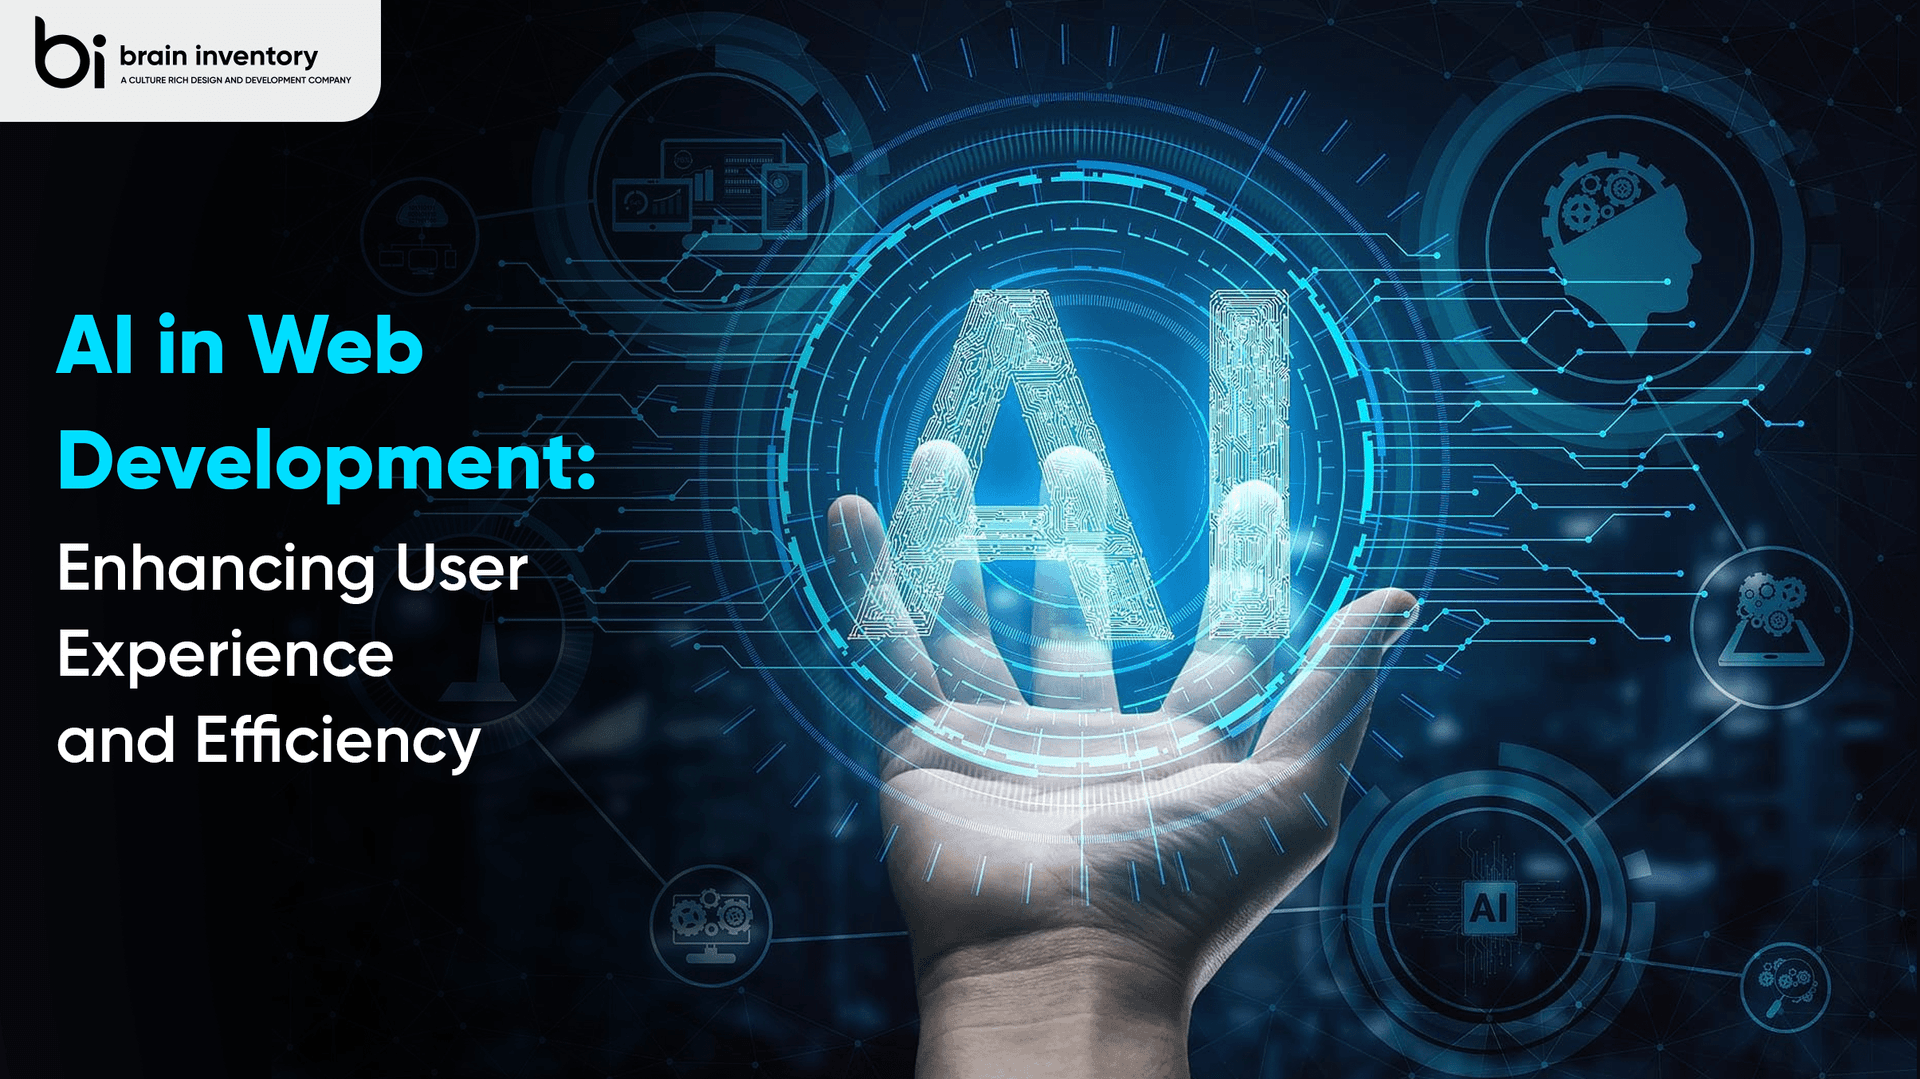 AI in Web Development: Enhancing User Experience and Efficiency